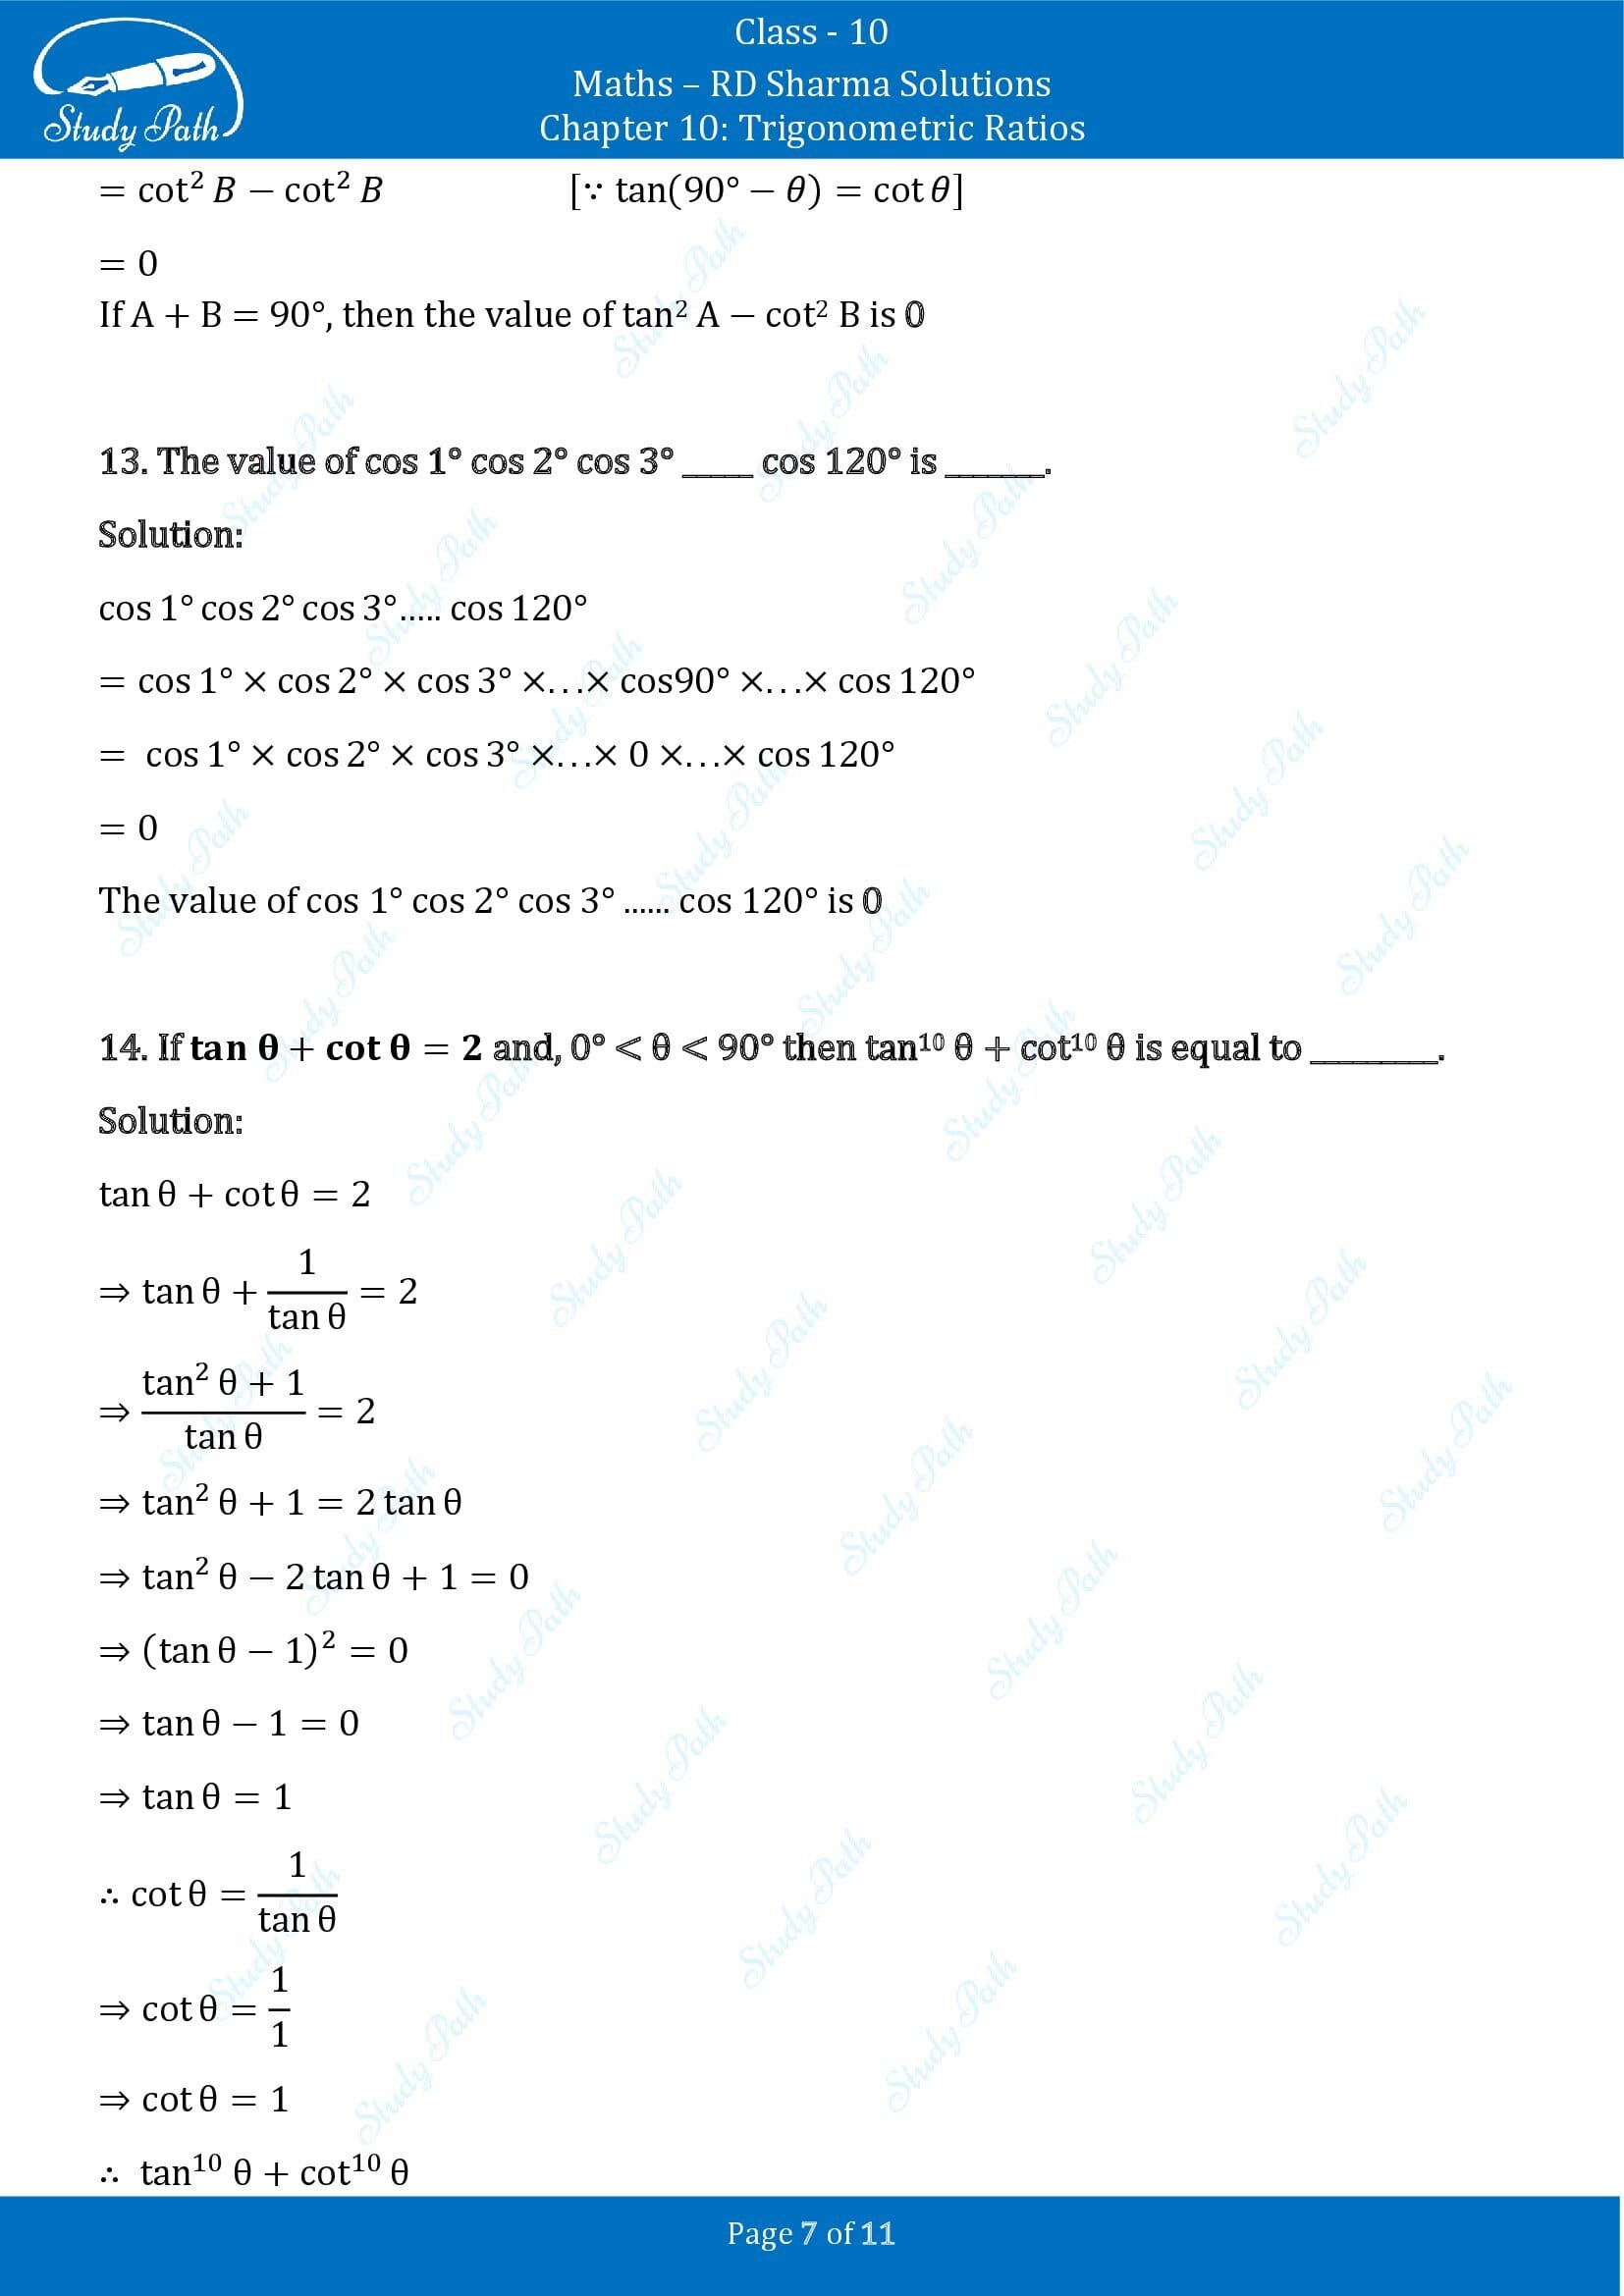 RD Sharma Solutions Class 10 Chapter 10 Trigonometric Ratios Fill in the Blank Type Questions FBQs 00007